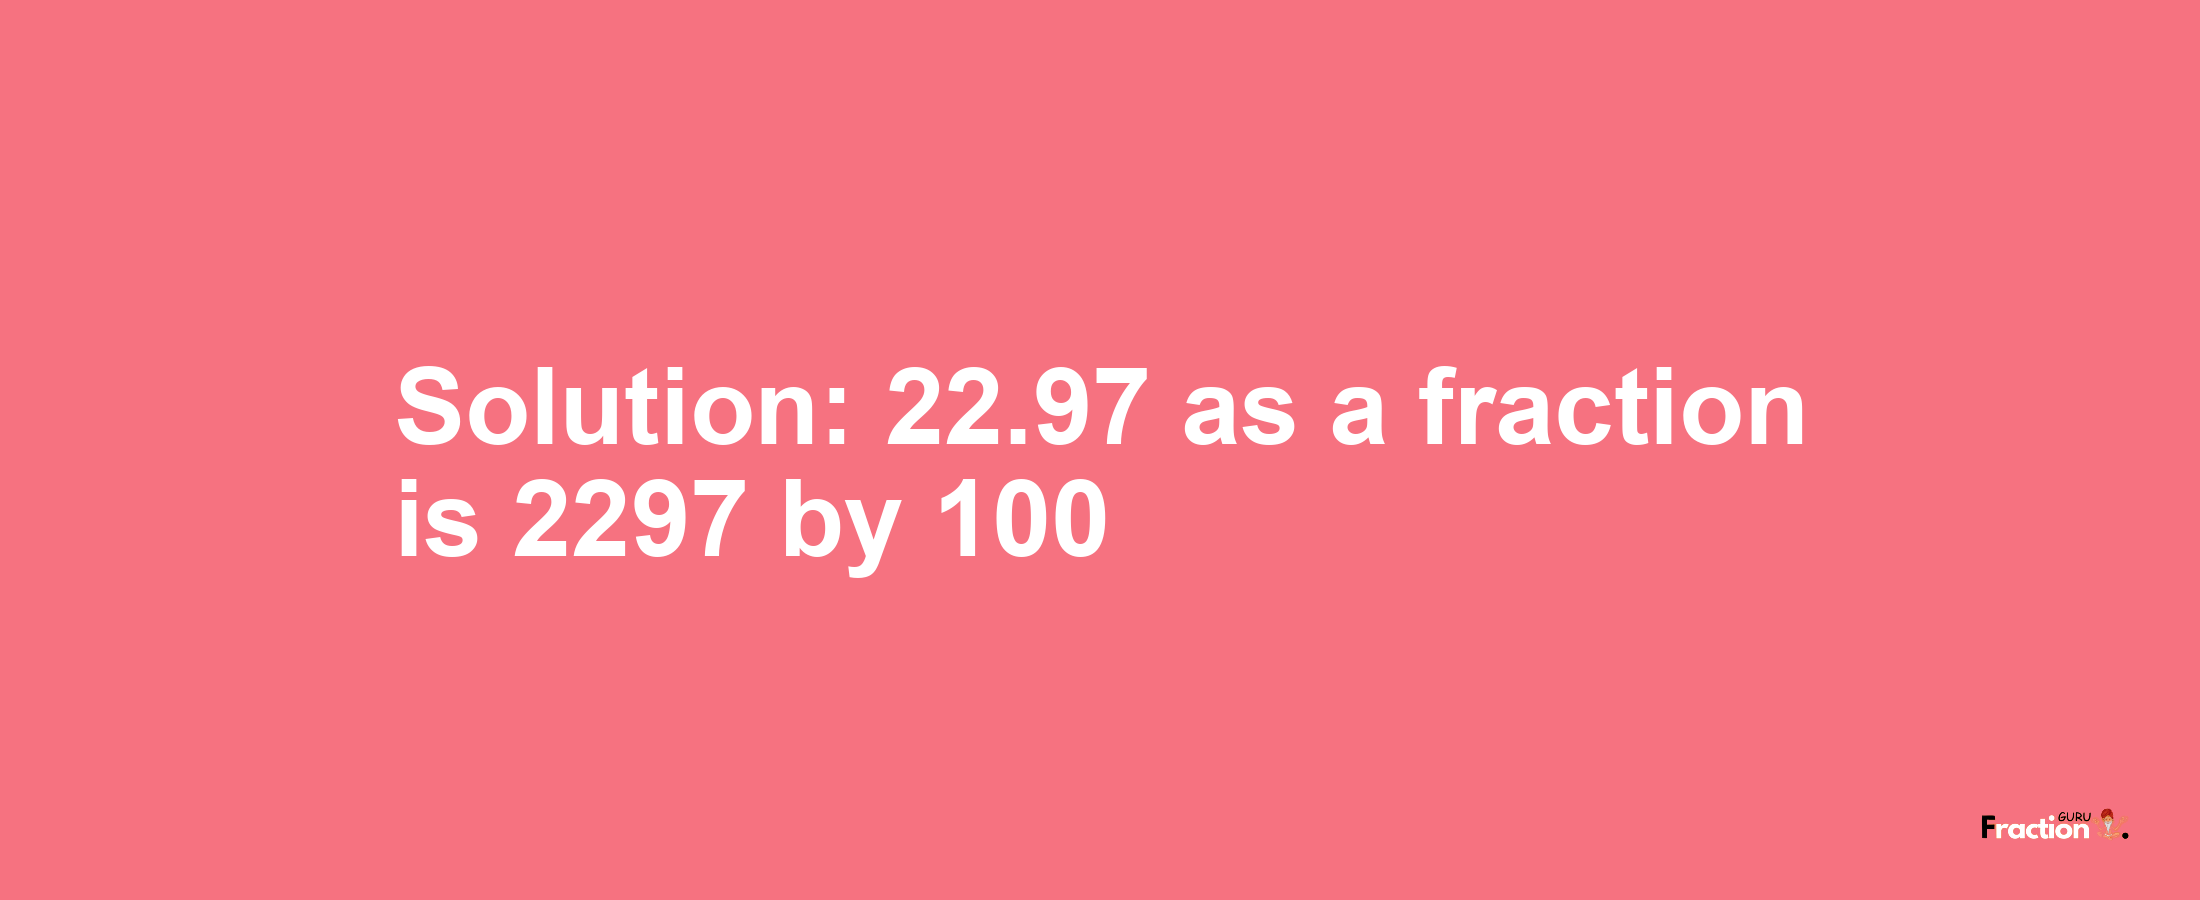 Solution:22.97 as a fraction is 2297/100